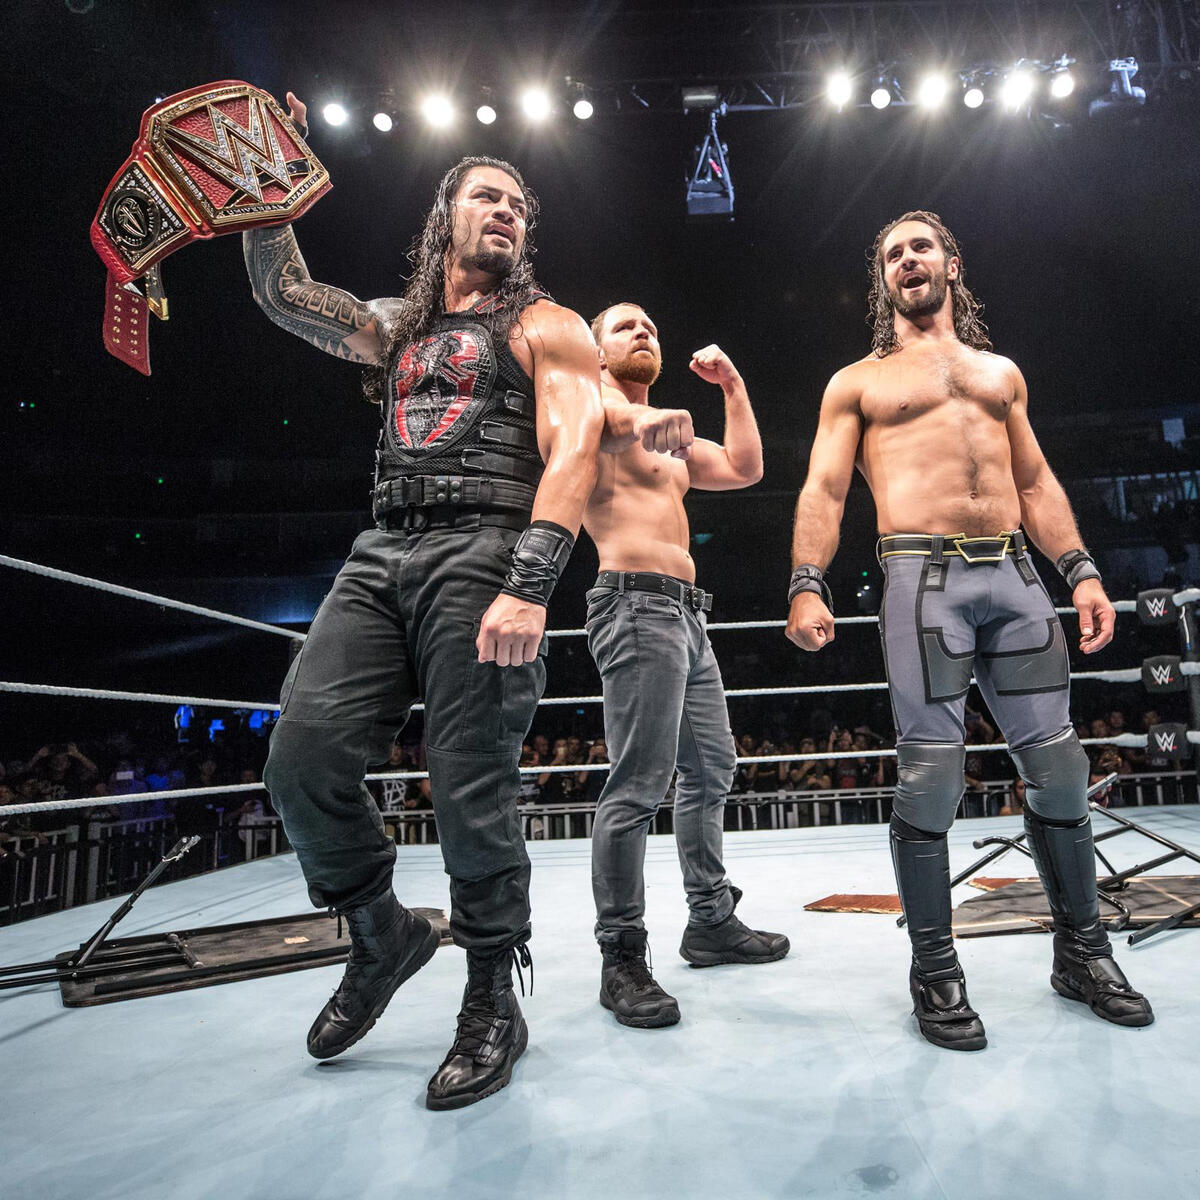 Never-before-seen photos of The Shield | WWE